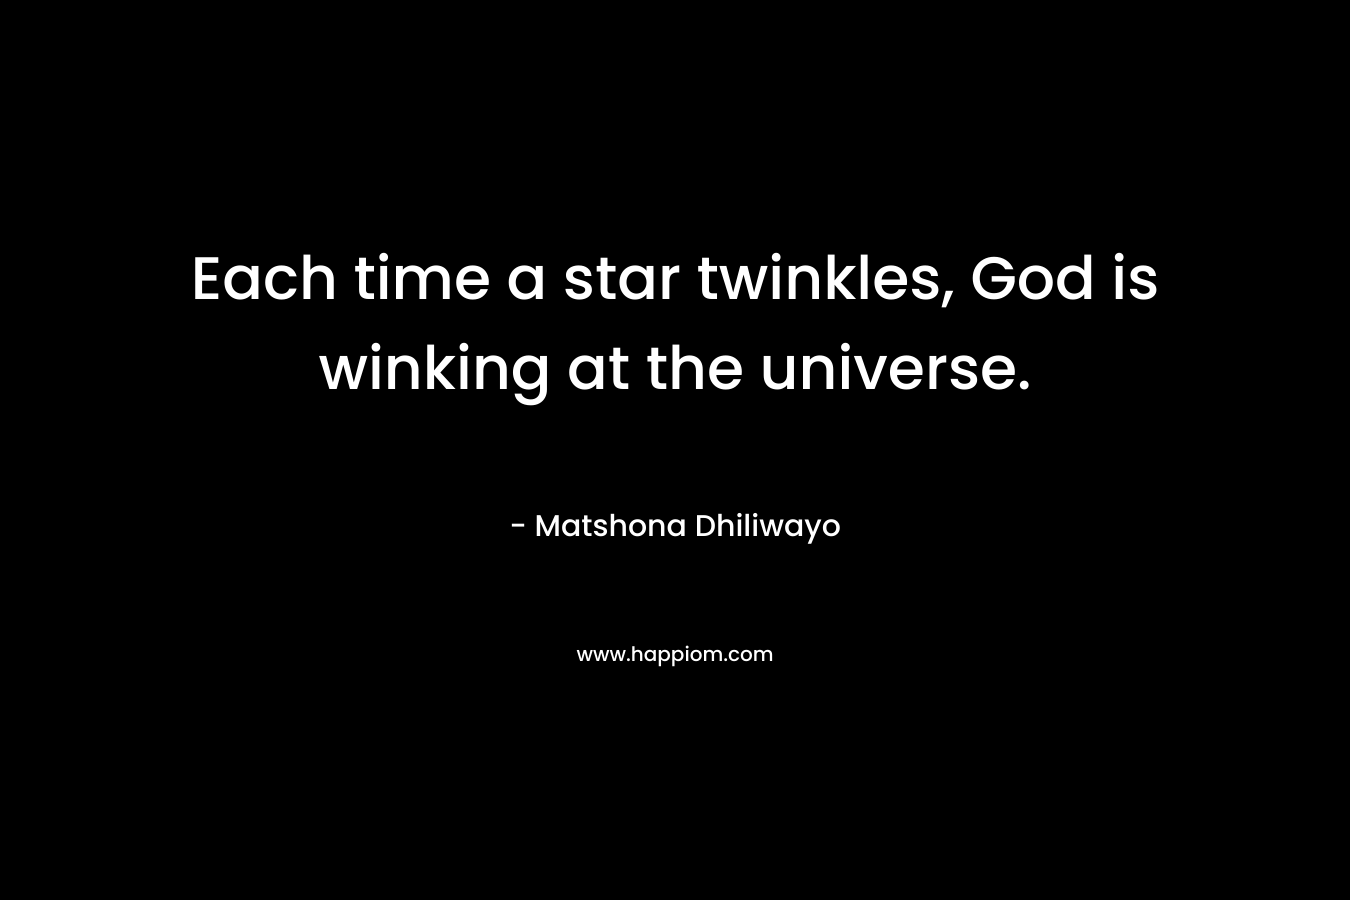 Each time a star twinkles, God is winking at the universe. – Matshona Dhiliwayo